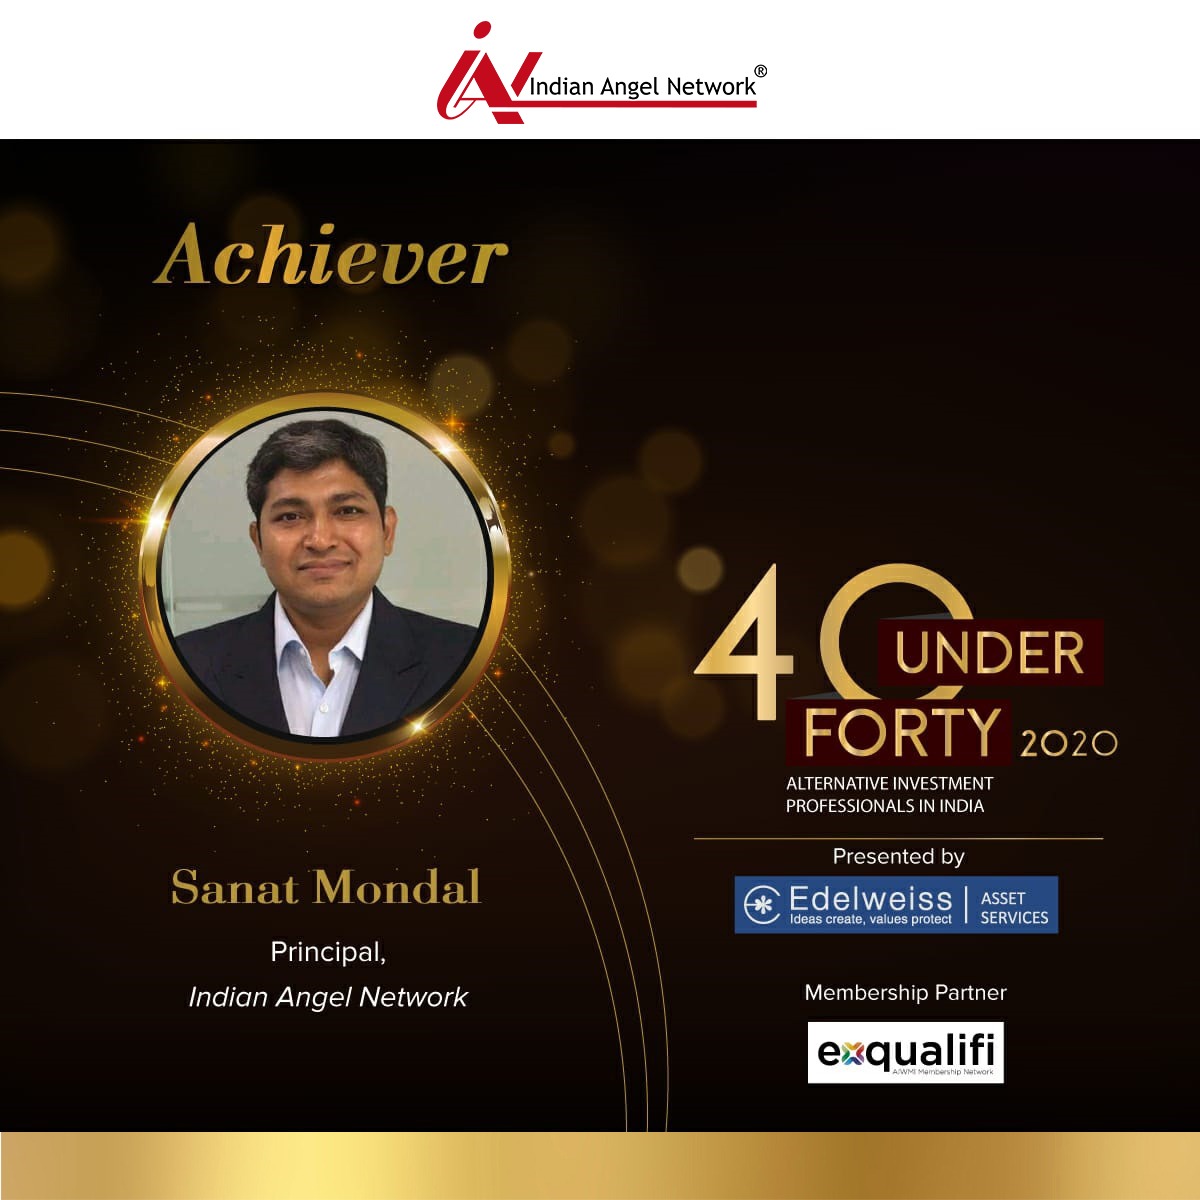 Making us proud and how! Congratulations Sanat Mondal for making it to 40 under 40 achievers- Alternative Investment Professionals in India. Way to go! 😃

#40under40 #InvestmentProfessionals #IAN 
@AIWMI @IAAIF_INDIA @EdelweissFin @EdelweissAMC